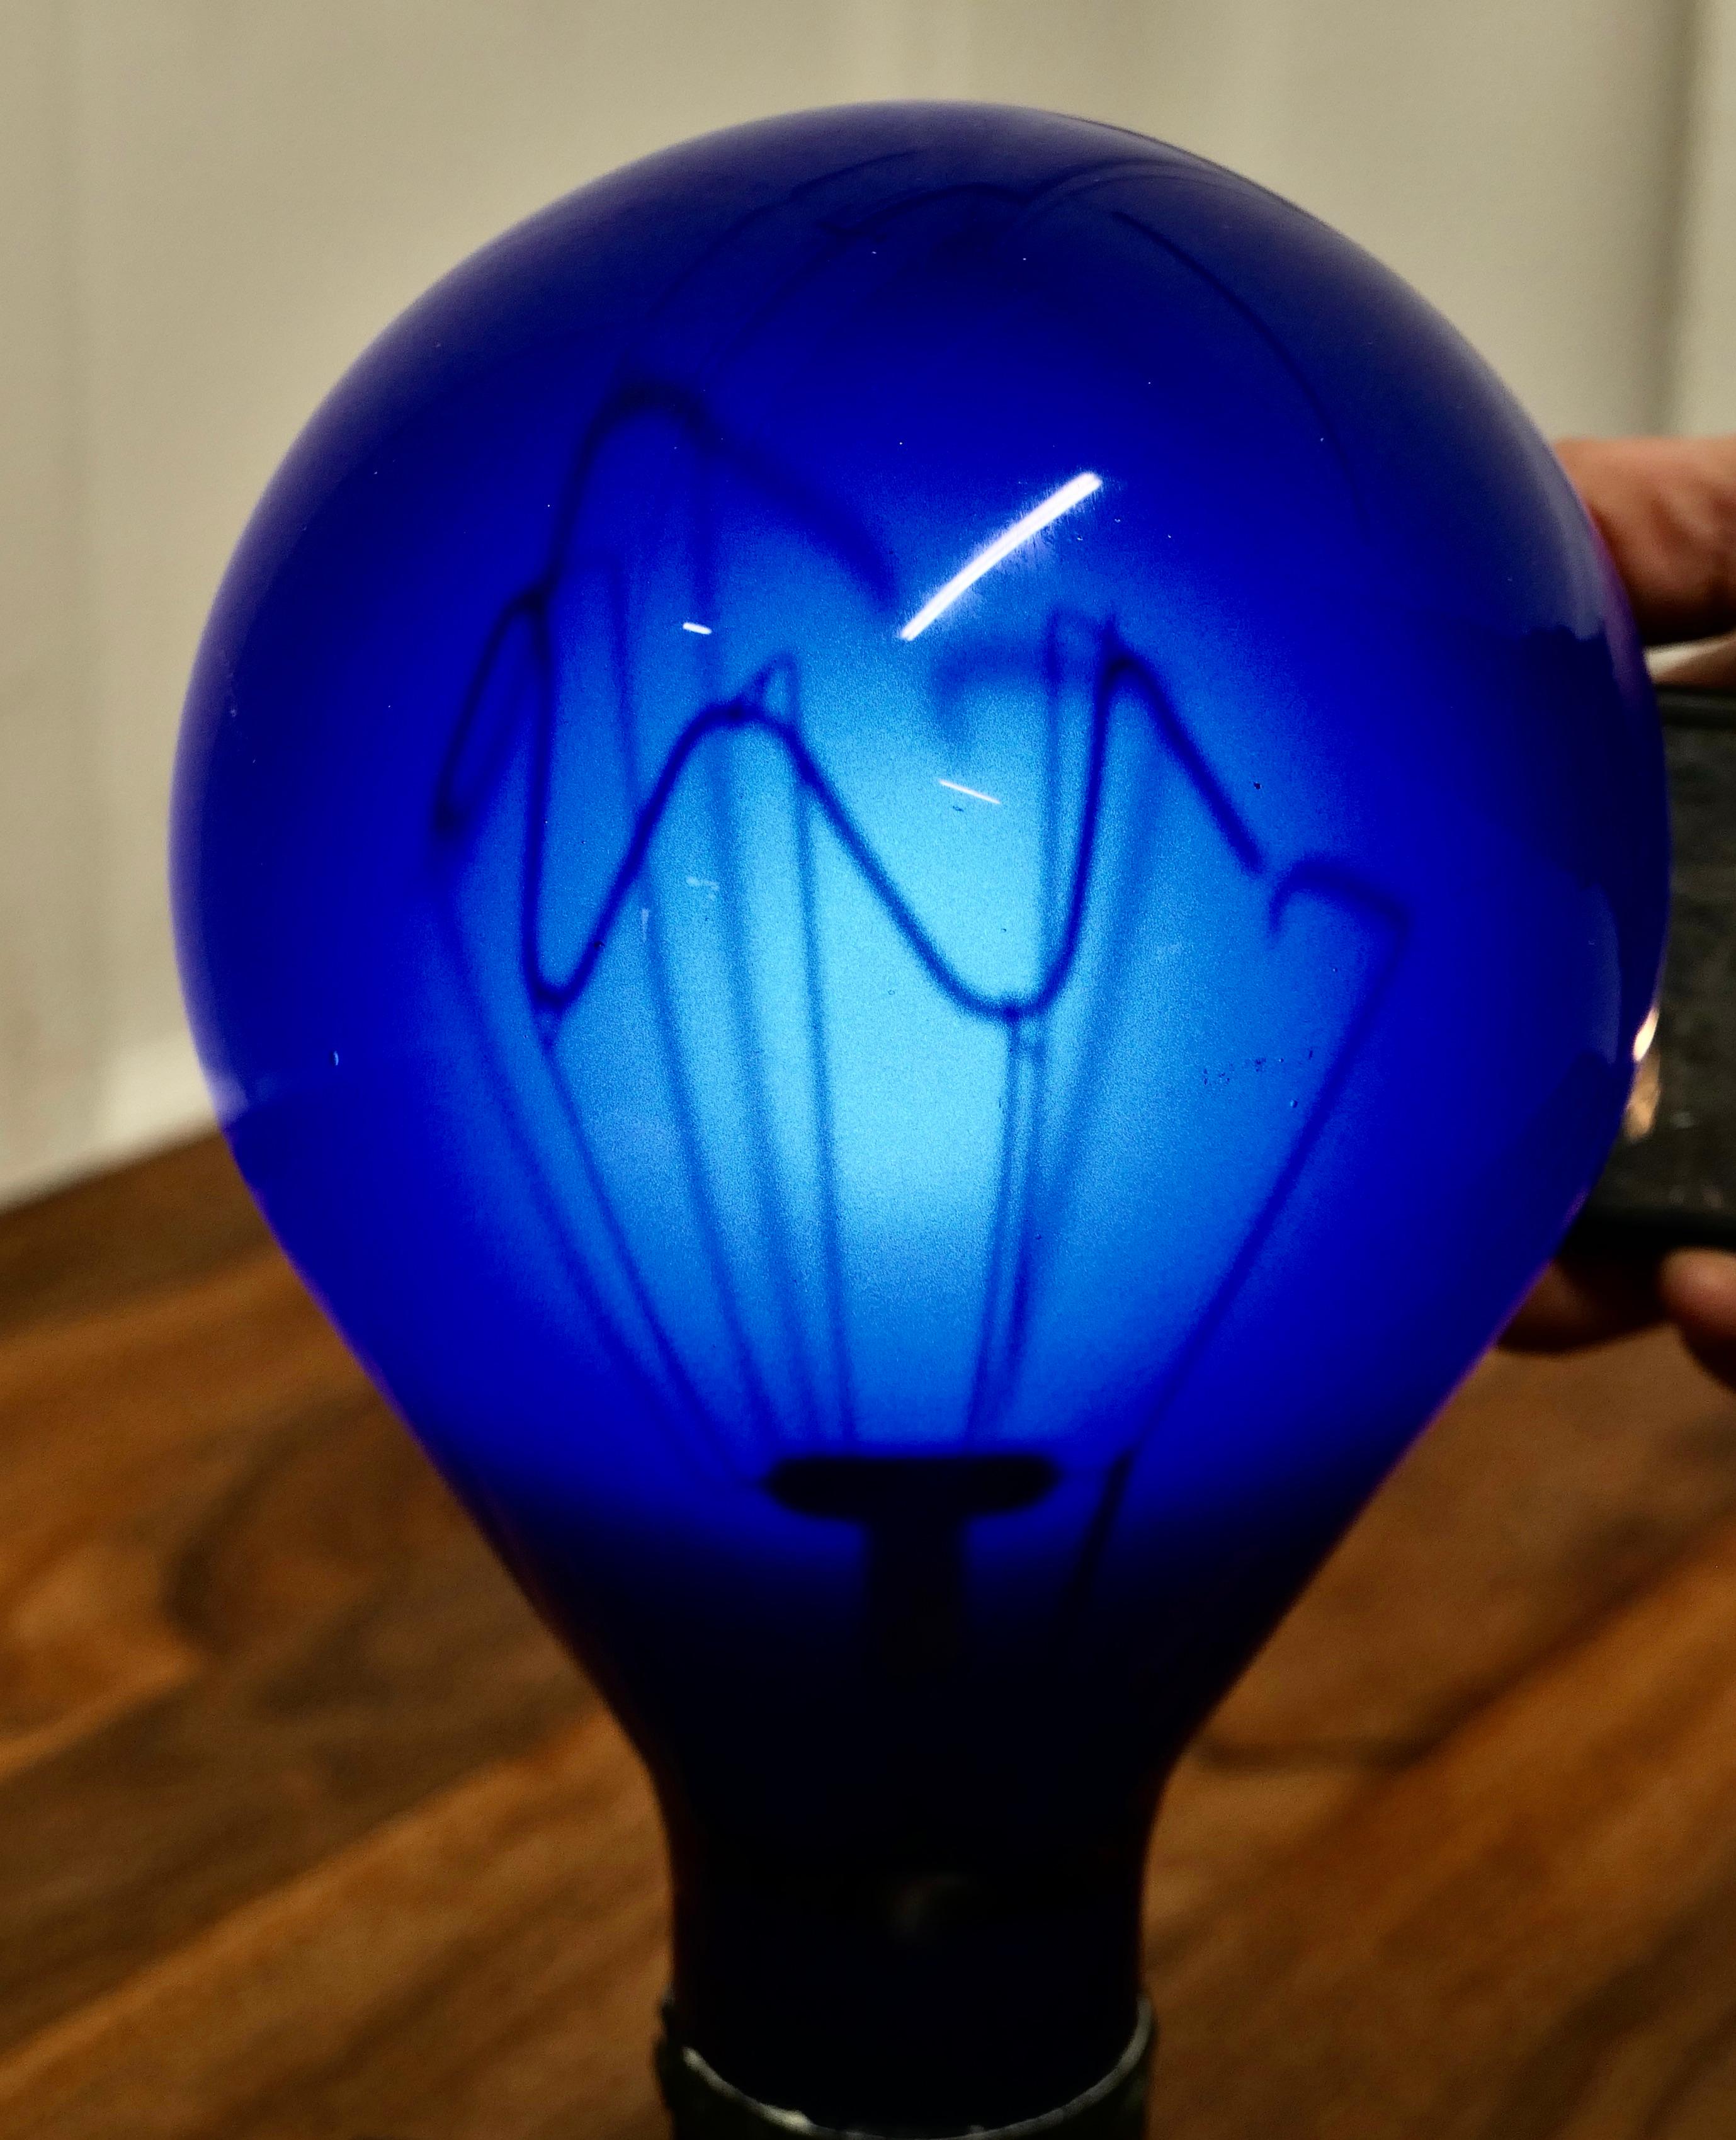 Industrial Sculpture Made From an Early American Light Bulb

This is not a working Light Bulb, it is in Blue glass and has been set on a rectangular plinth and when lit from behind you can see the internal element
The Bulb comes from the USA and is